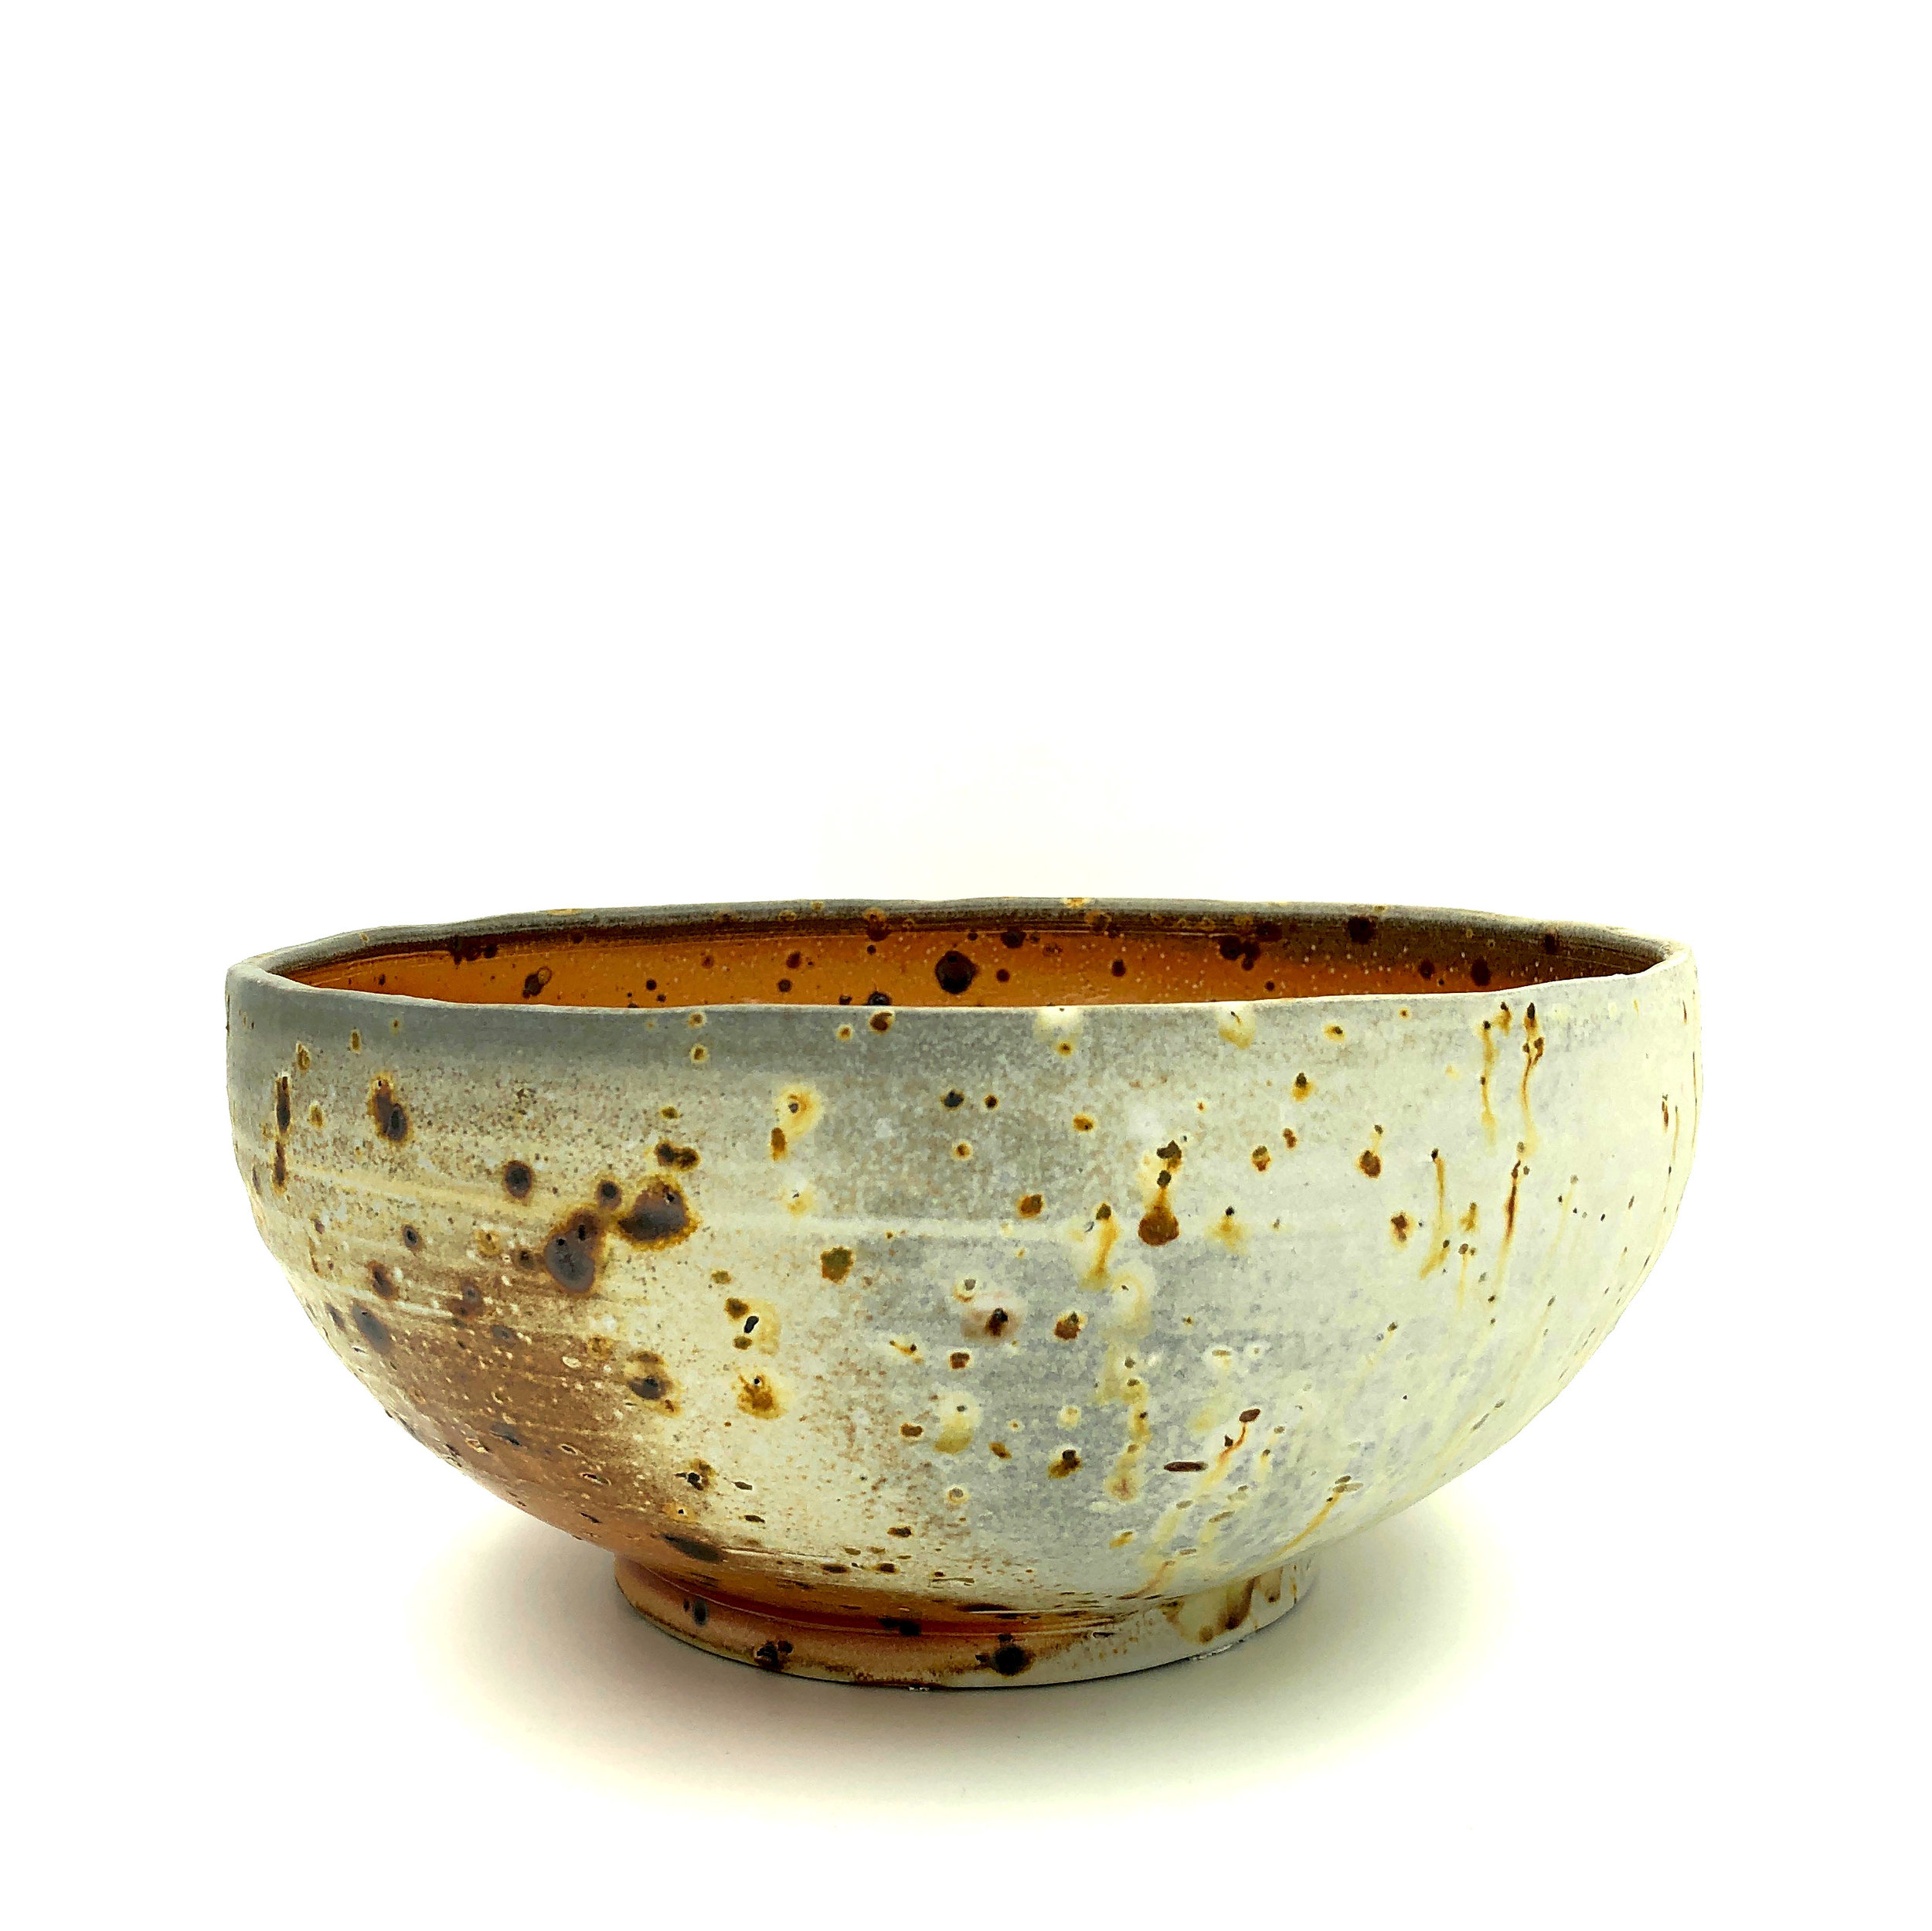   Serving Bowl , soda fired stoneware with coal slag, 2018 